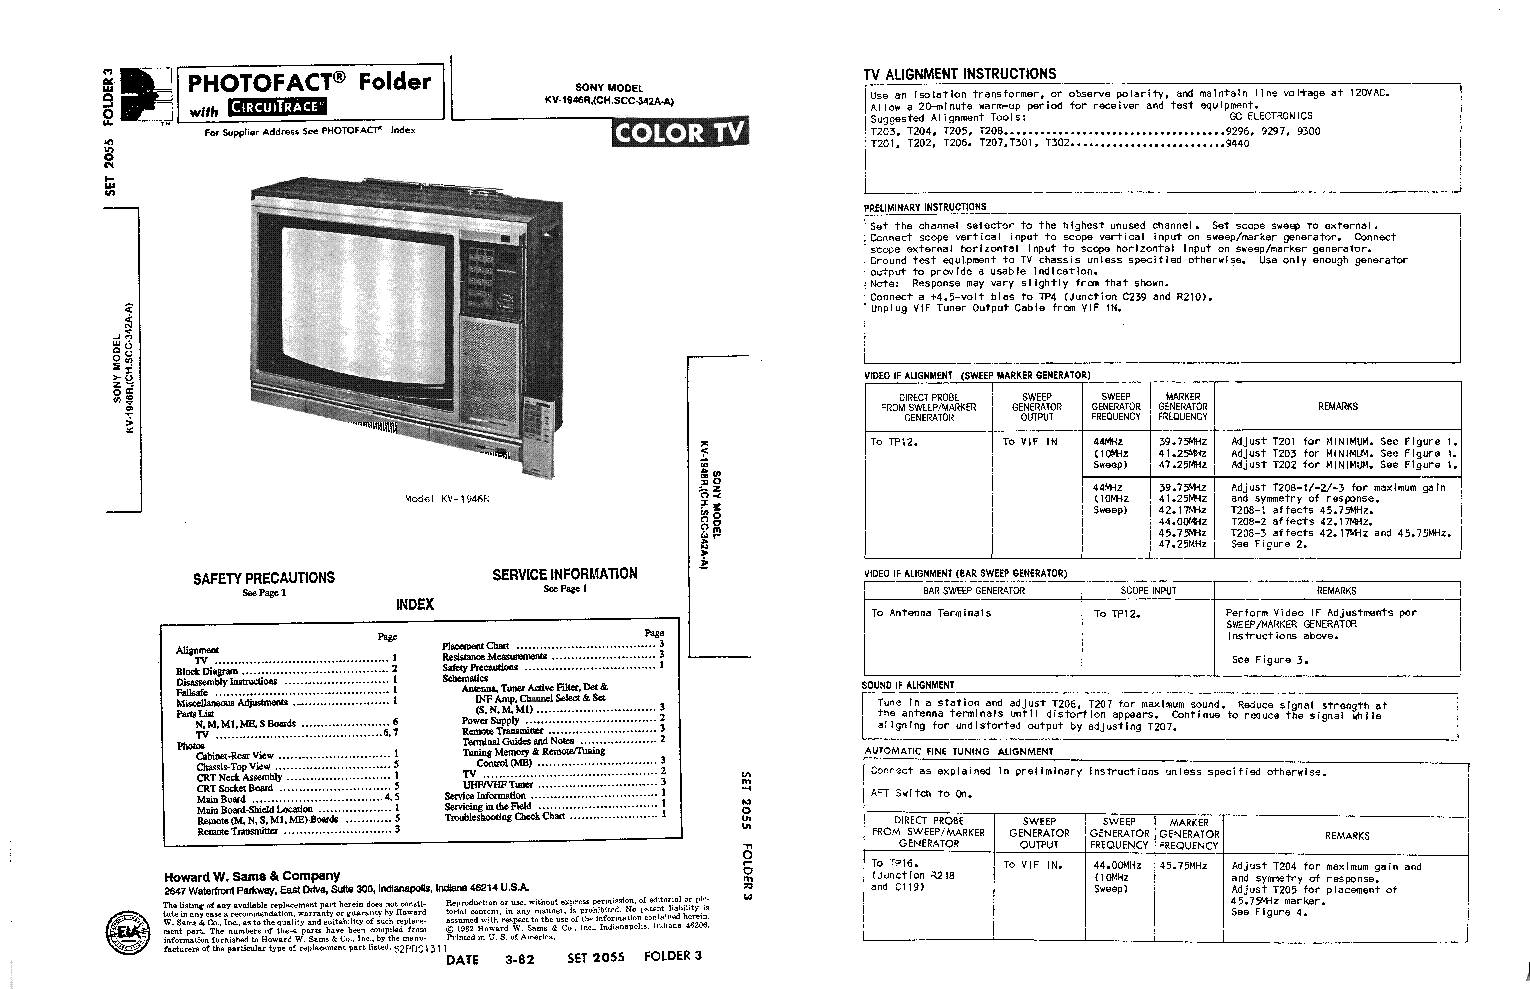 SONY KV-1946R CH SCC-342A-A service manual (1st page)